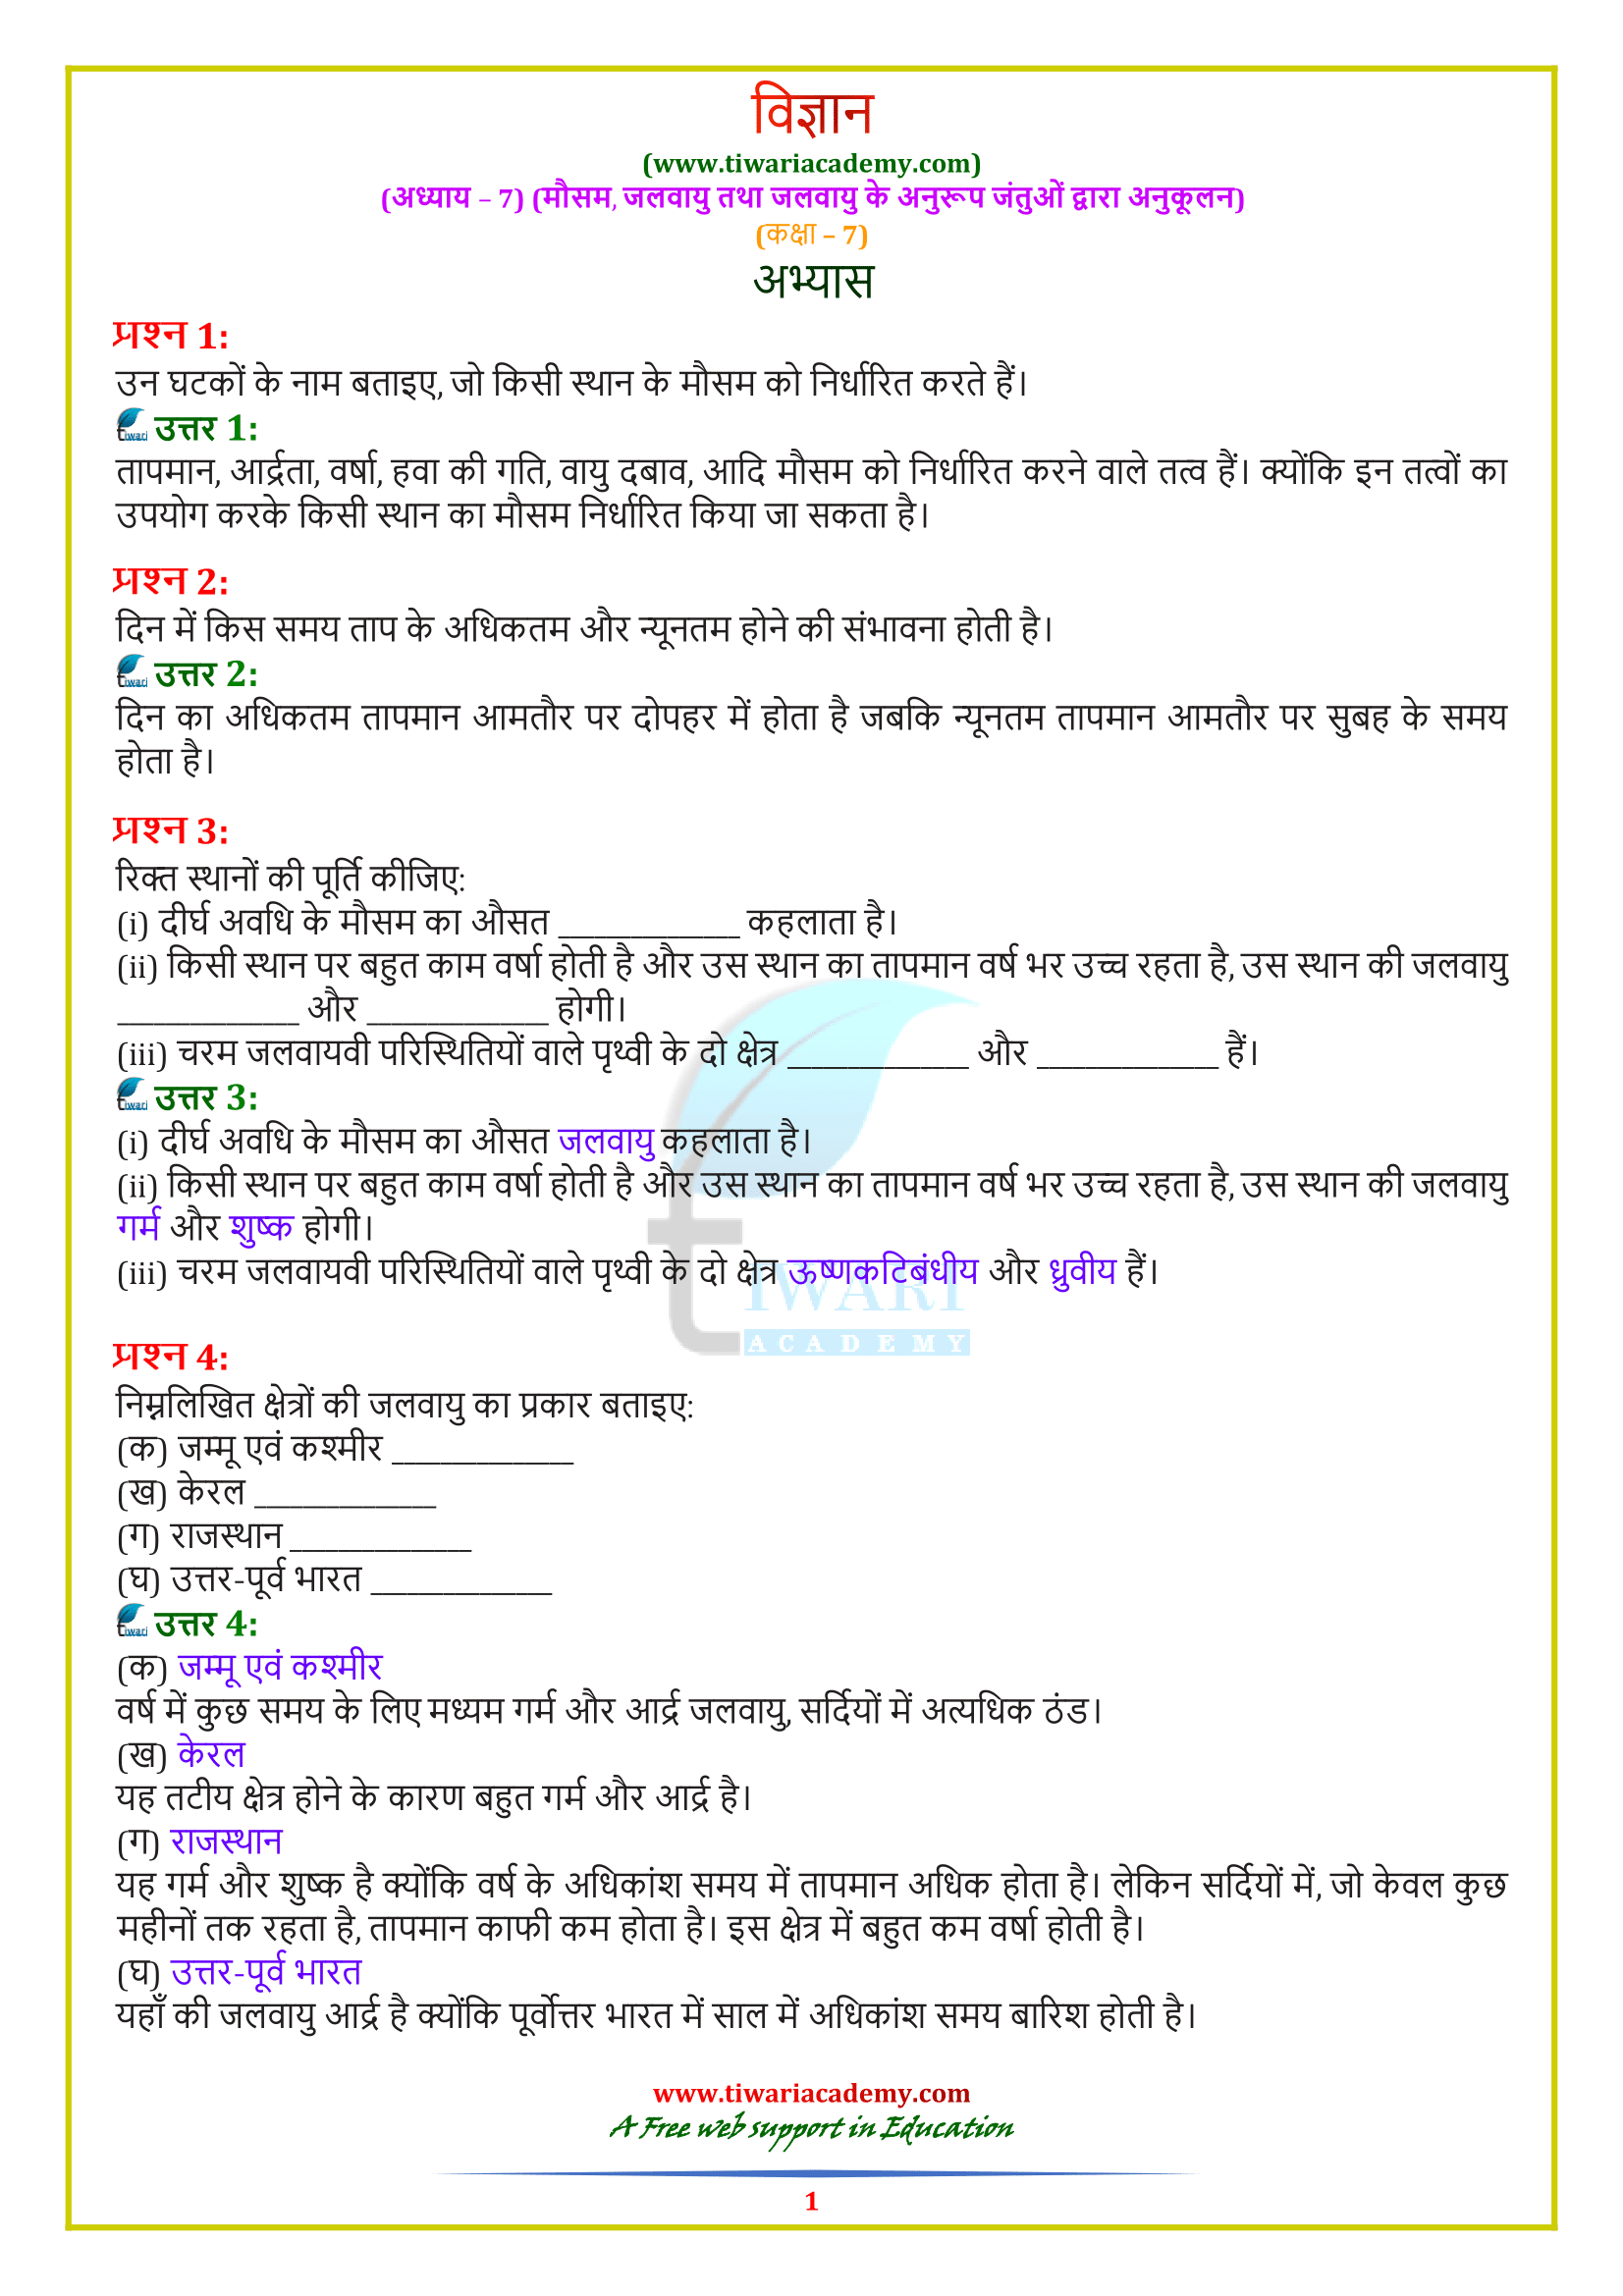 NCERT Solutions for Class 7 Science अध्याय 7